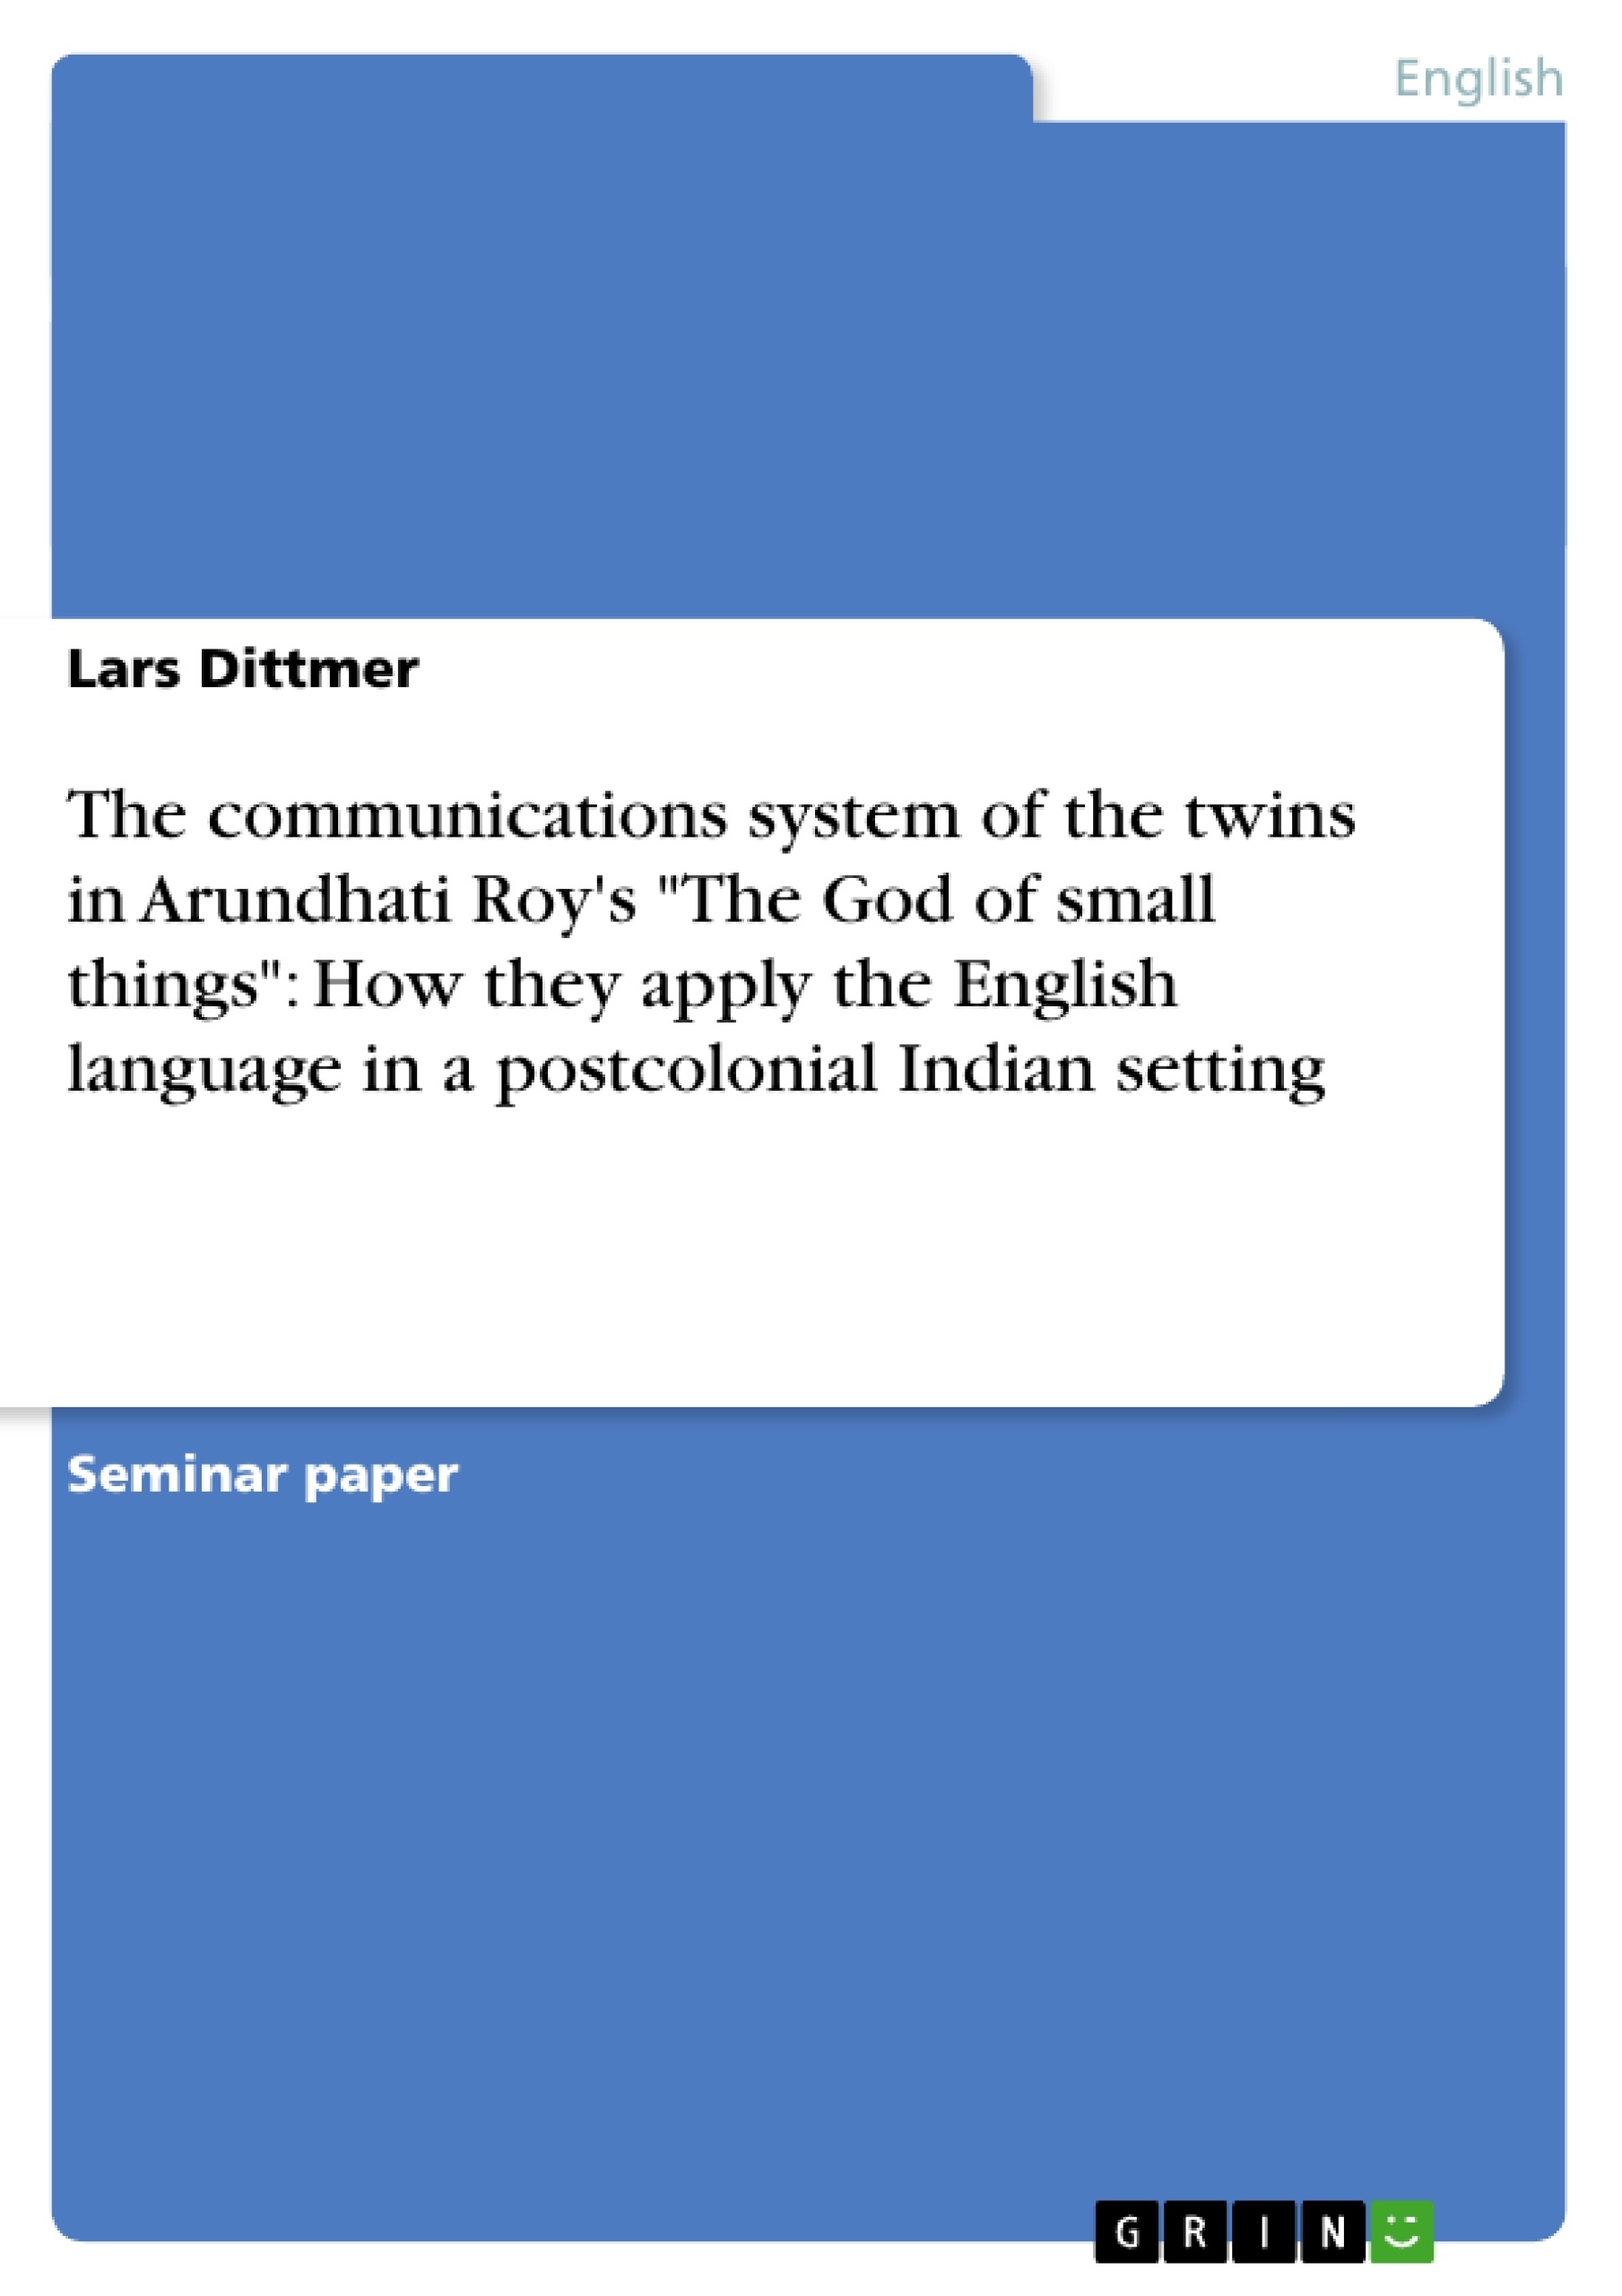 Titel: The communications system of the twins in Arundhati Roy's "The God of small things": How they apply the English language in a postcolonial Indian setting